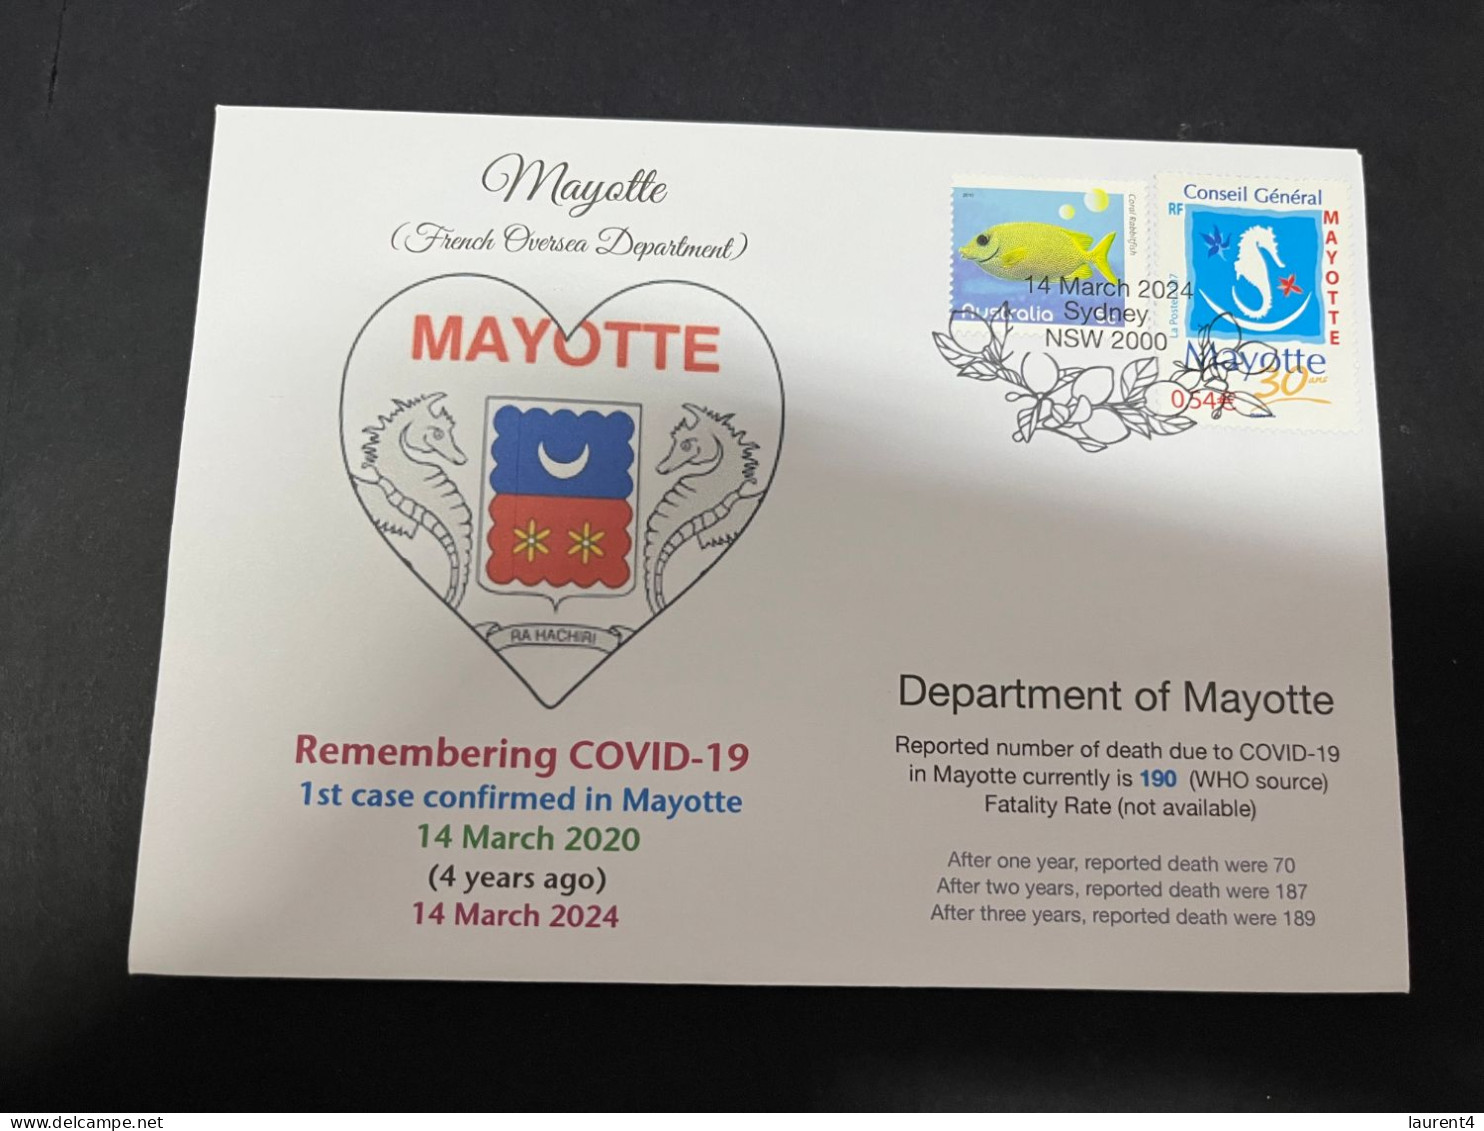 14-3-2024 (3 Y 2) COVID-19 4th Anniversary - Mayotte (French Oversea Department) - 14 March 2024 (Mayotte Flag Stamp) - Malattie